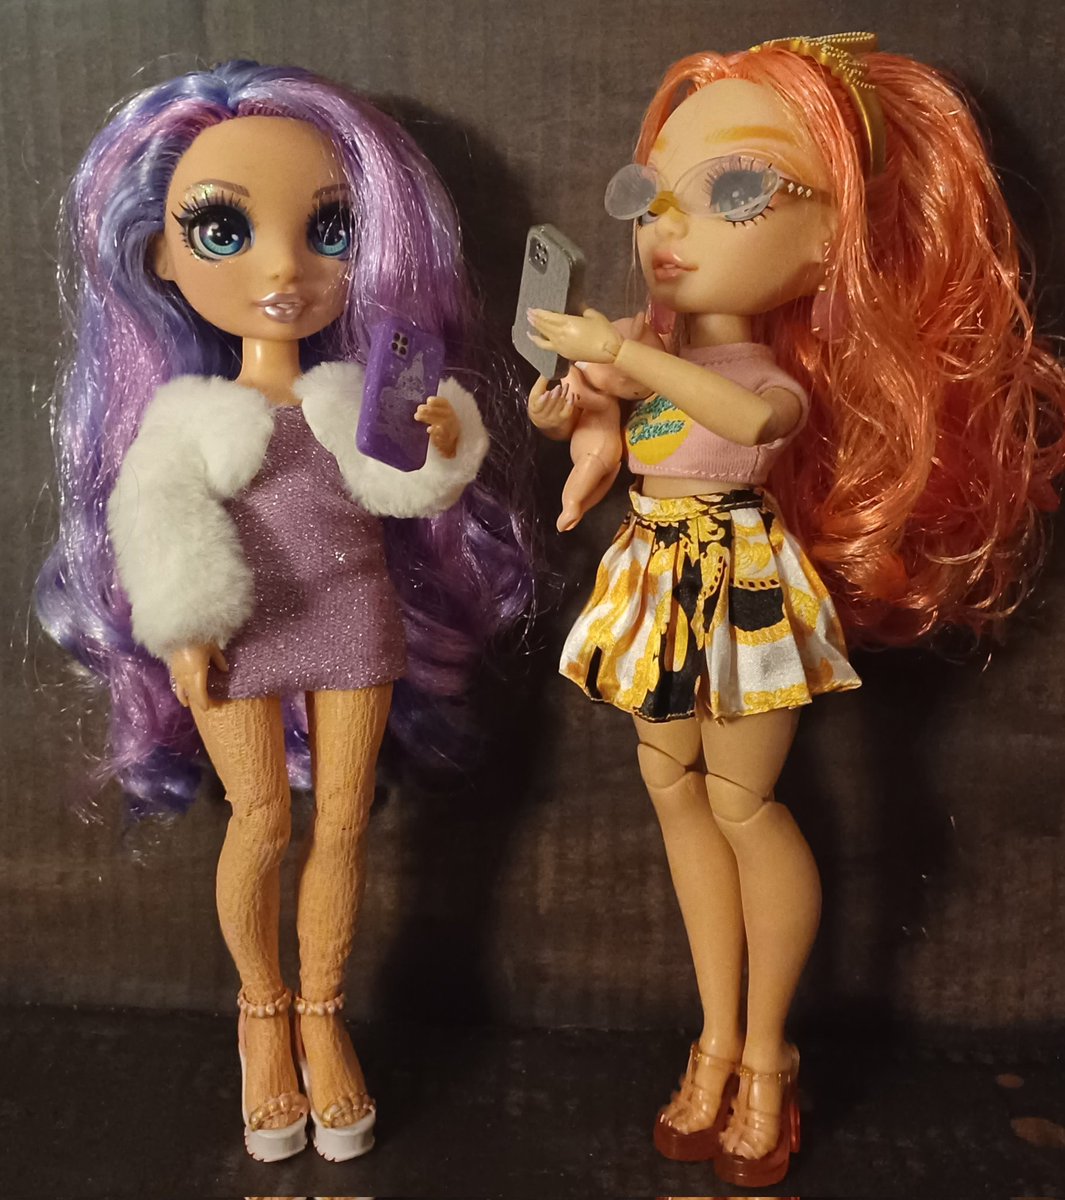 The influencers are hanging out together!💜🩷
#rainbowhigh #shadowhigh #mga #dolls #pinklypaige #violetwillow #dollphotography #rainbowhighdolls